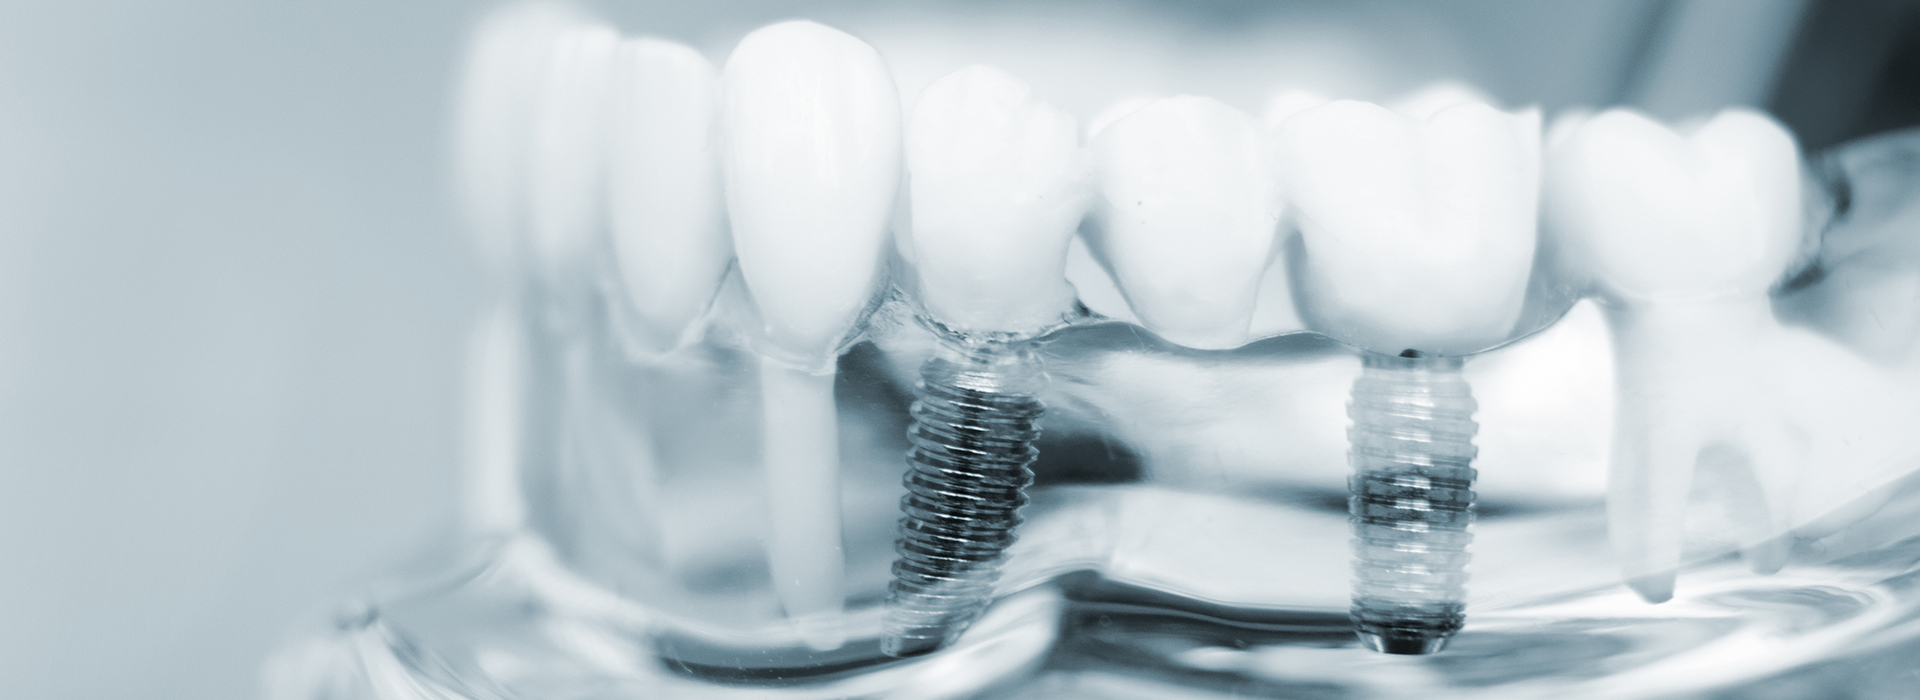 A close-up of a transparent dental implant with screws and a dental crown, showcasing the intricate details of dental technology.